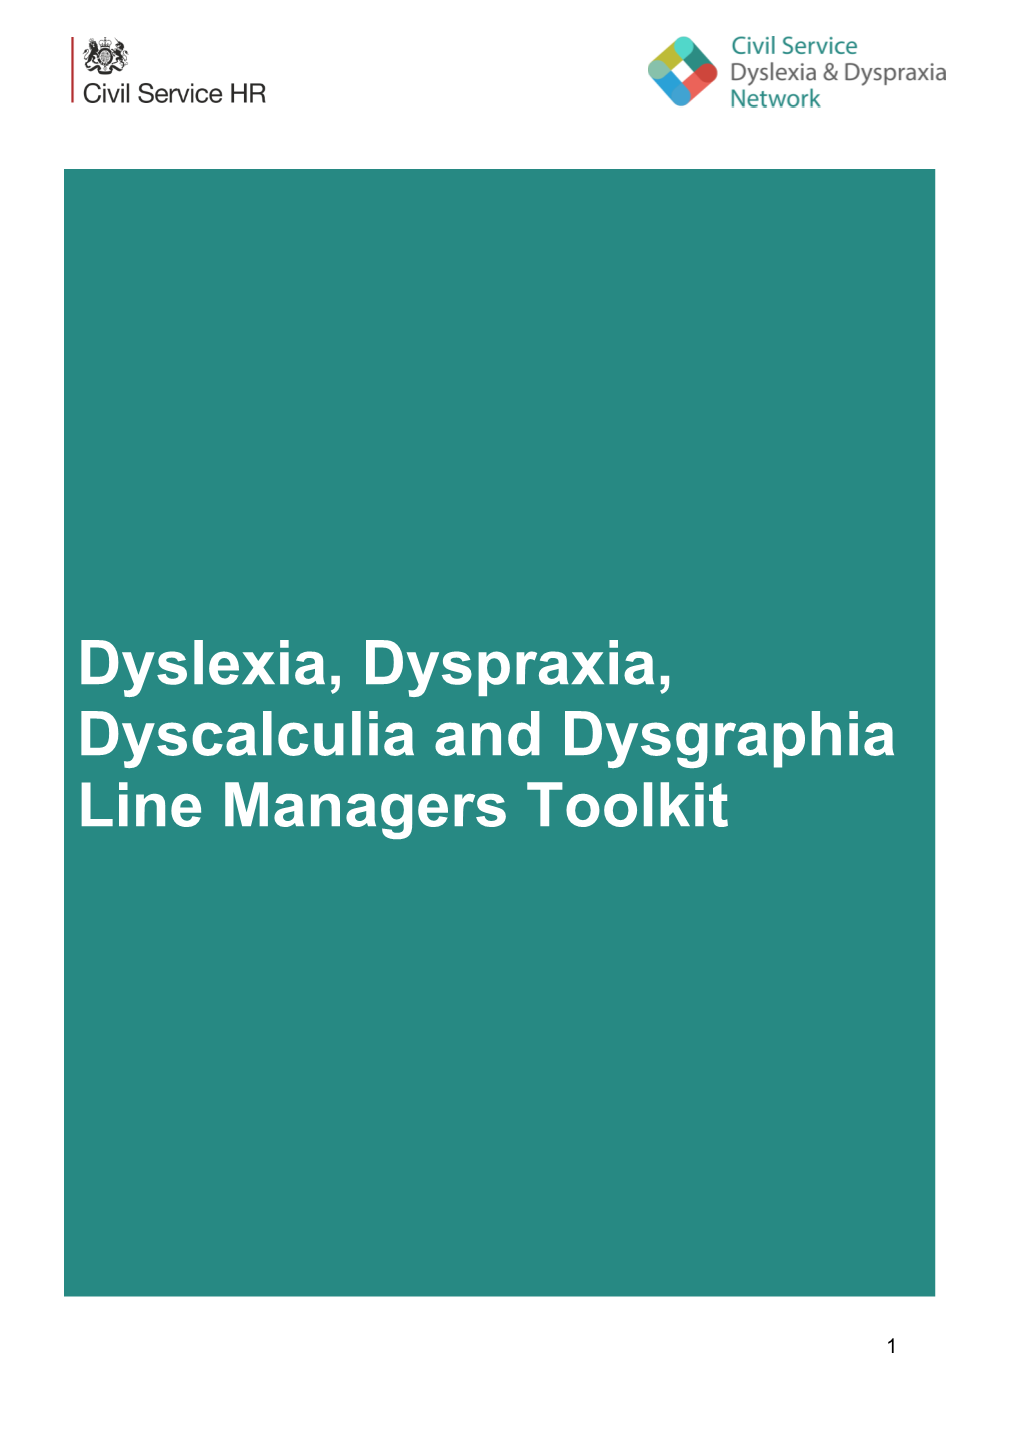 Dyslexia, Dyspraxia, Dyscalculia and Dysgraphia Line Managers Toolkit